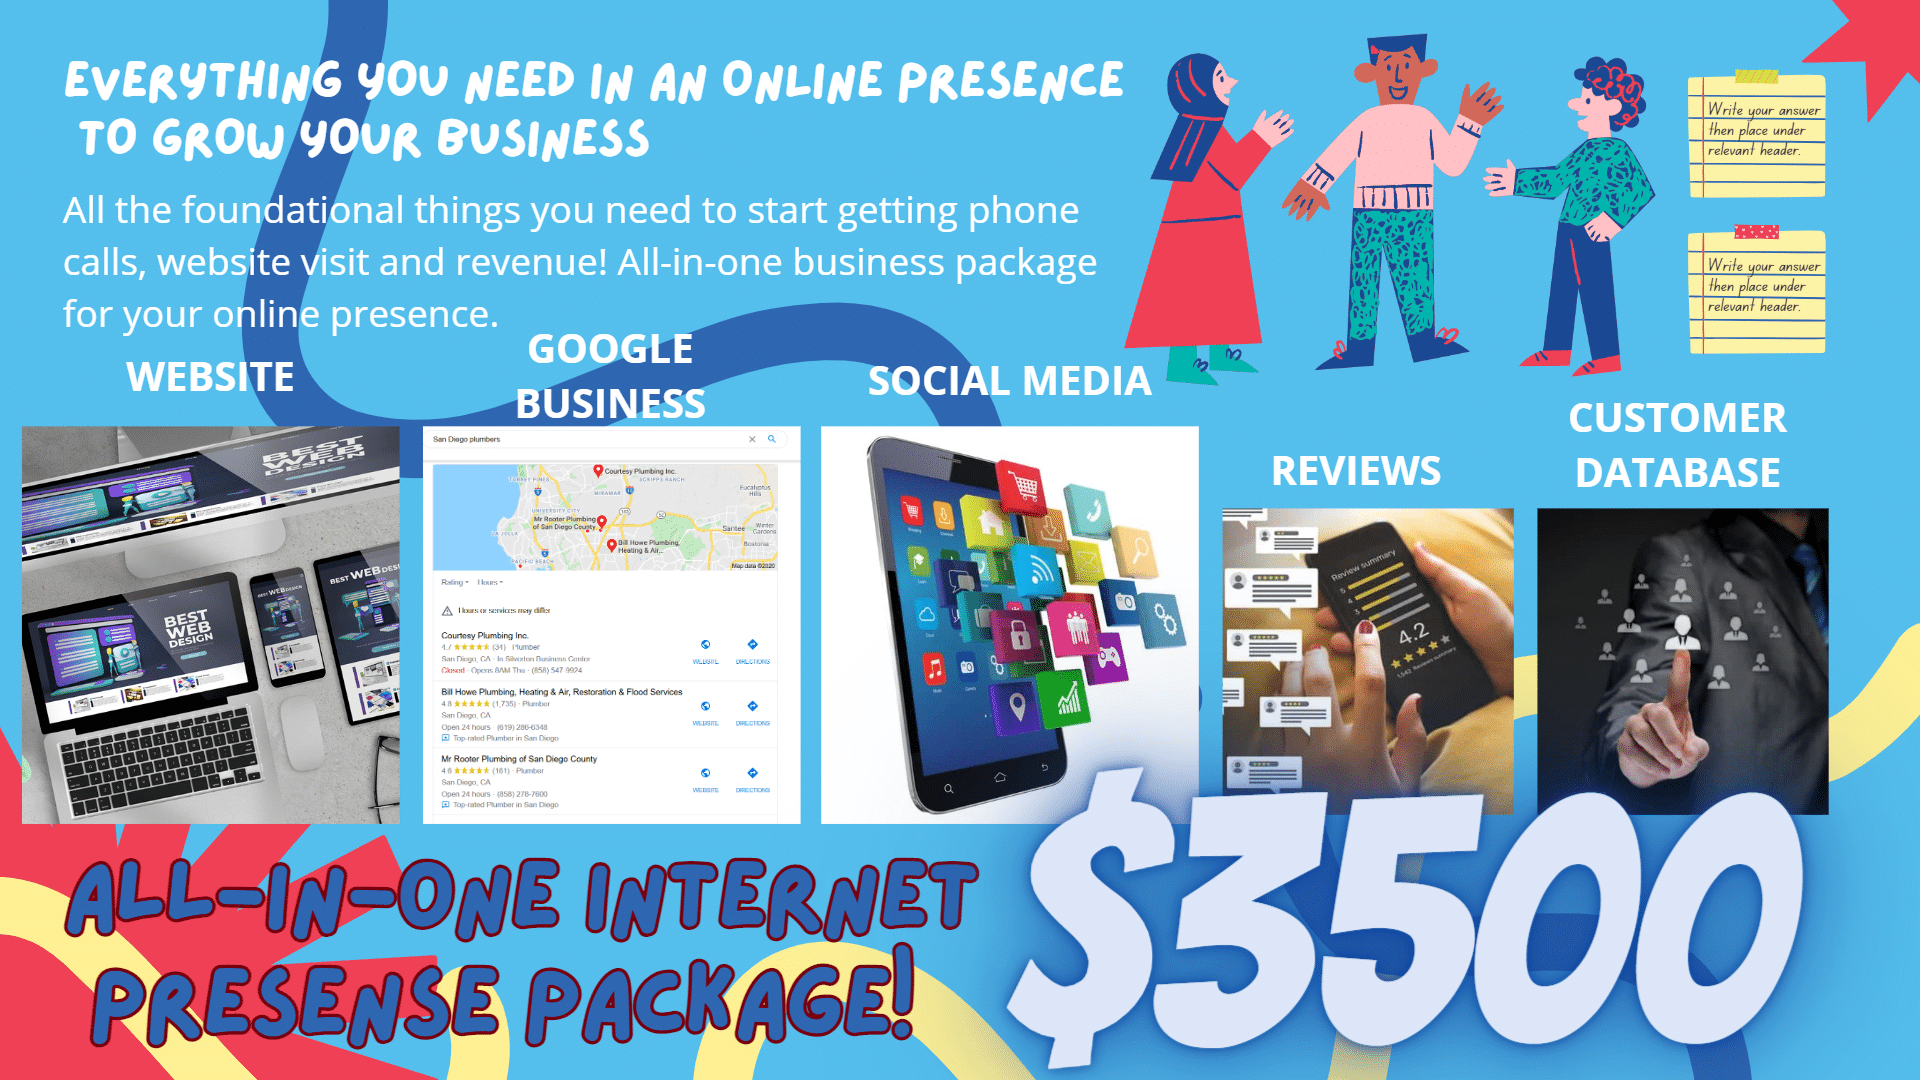 All-In-One internet presence package